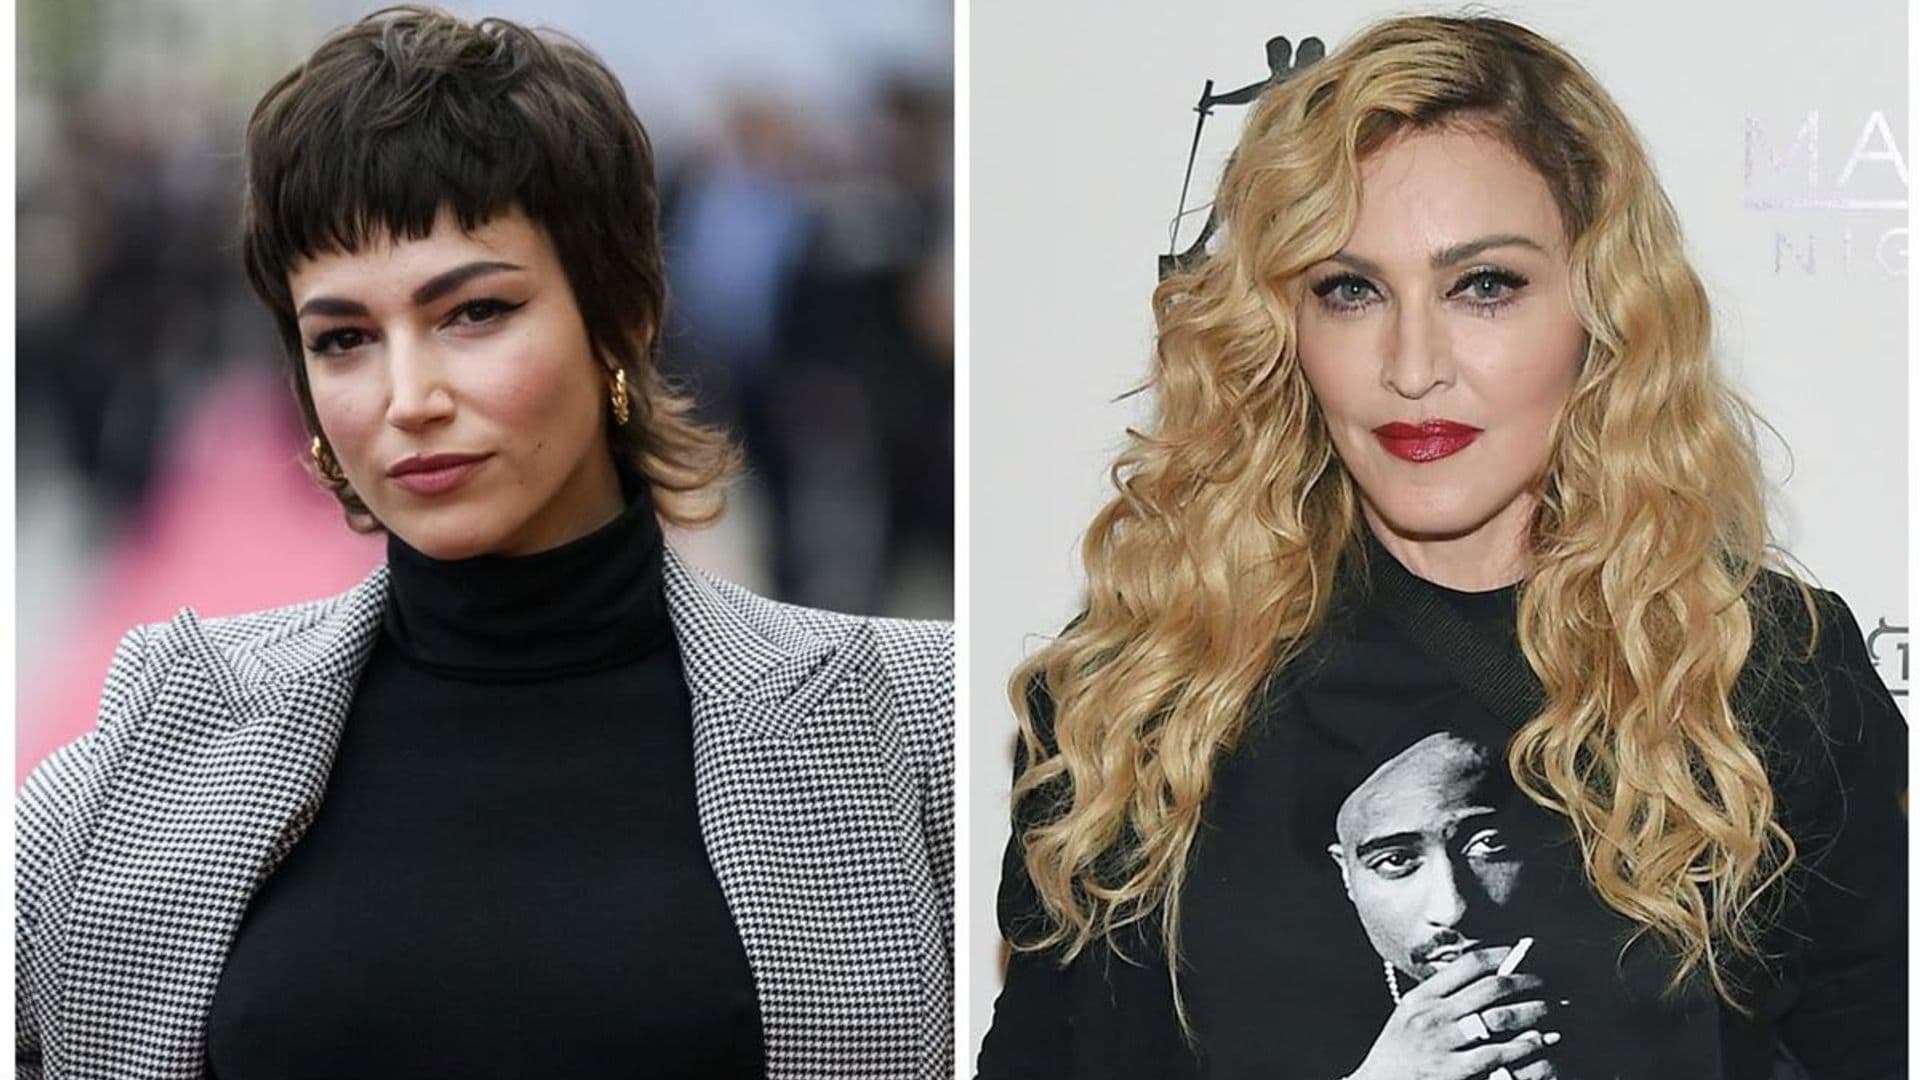 The incredible story of how Úrsula Corberó met Madonna on a plane